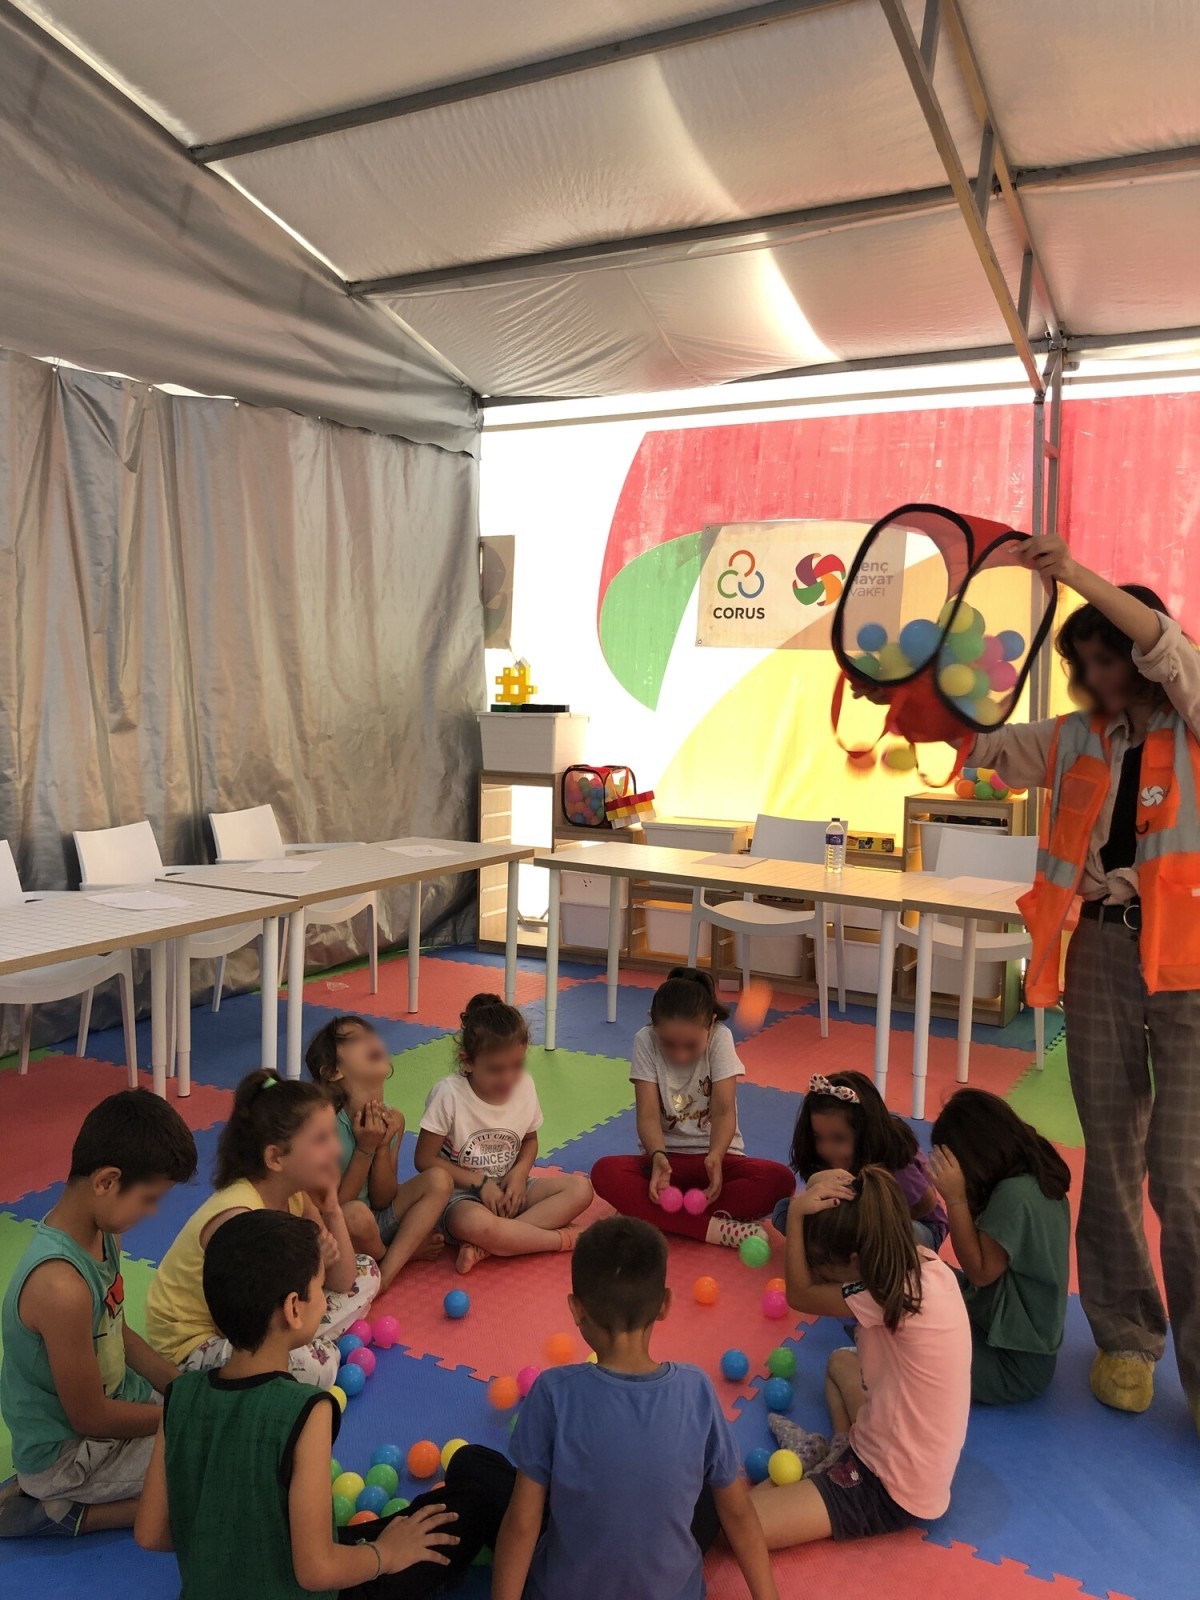 Through local partnership, Corus is providing psychosocial support and humanitarian aid in Turkey (Turkiye) after the February 2023 earthquakes. 